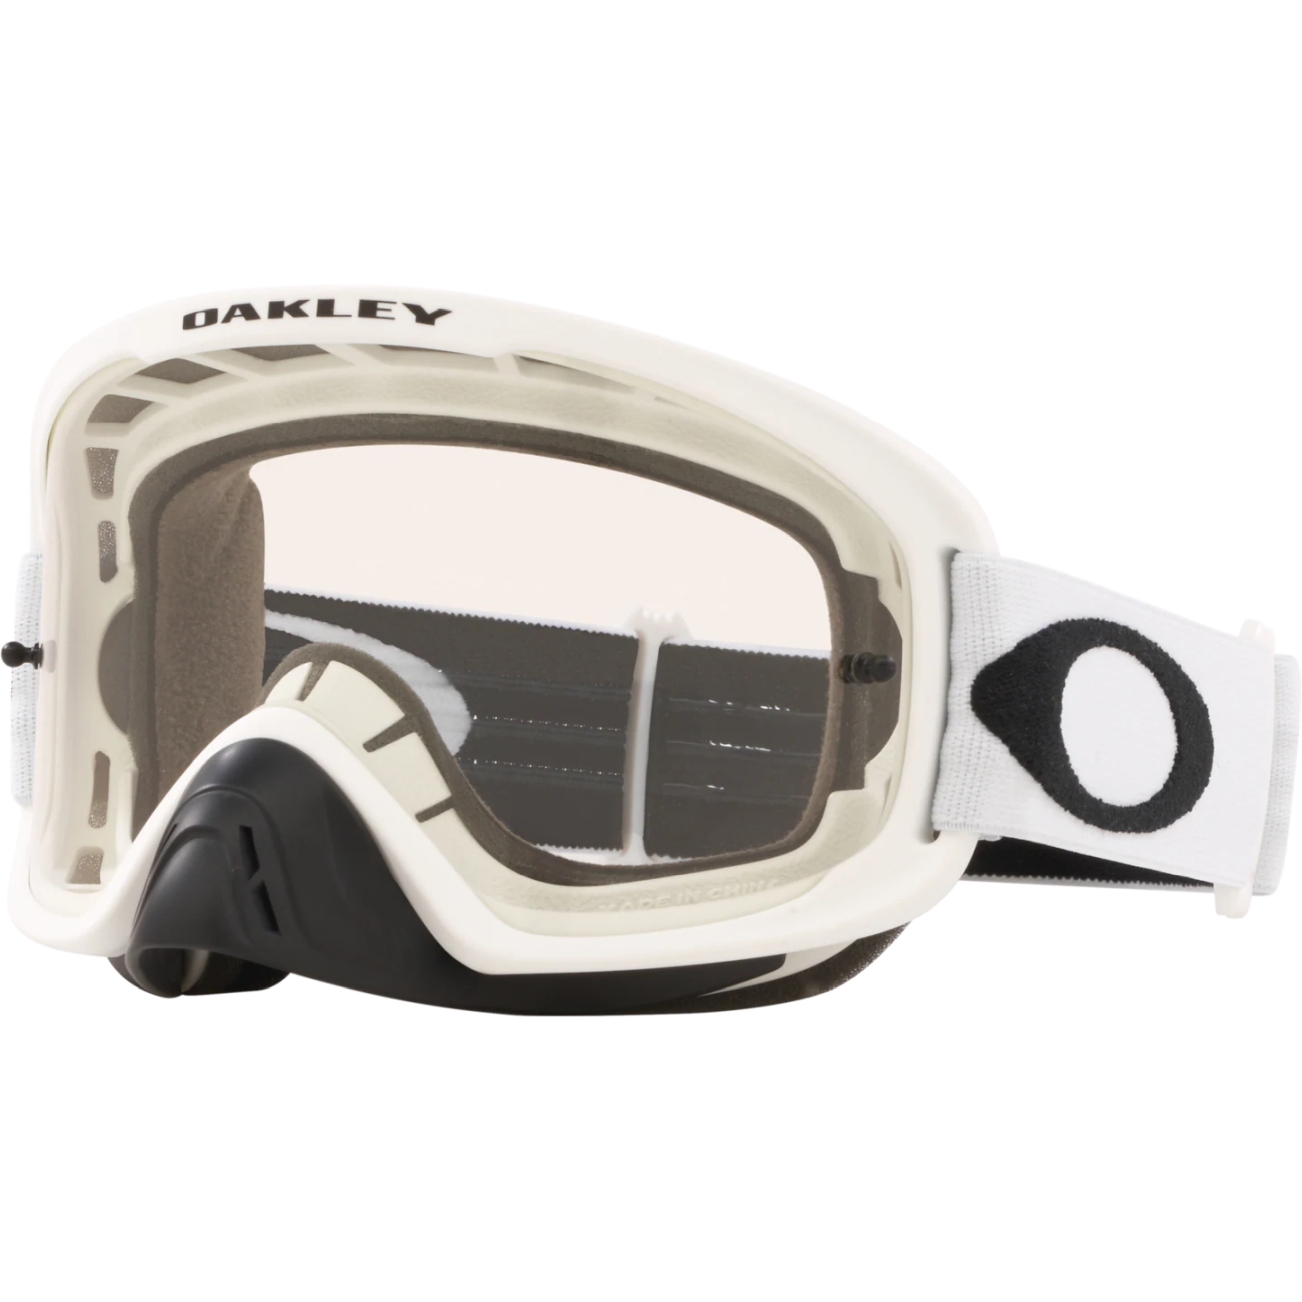 Image of Oakley O-Frame 2.0 PRO MX Goggles - Matte White/Clear - OO7115-02